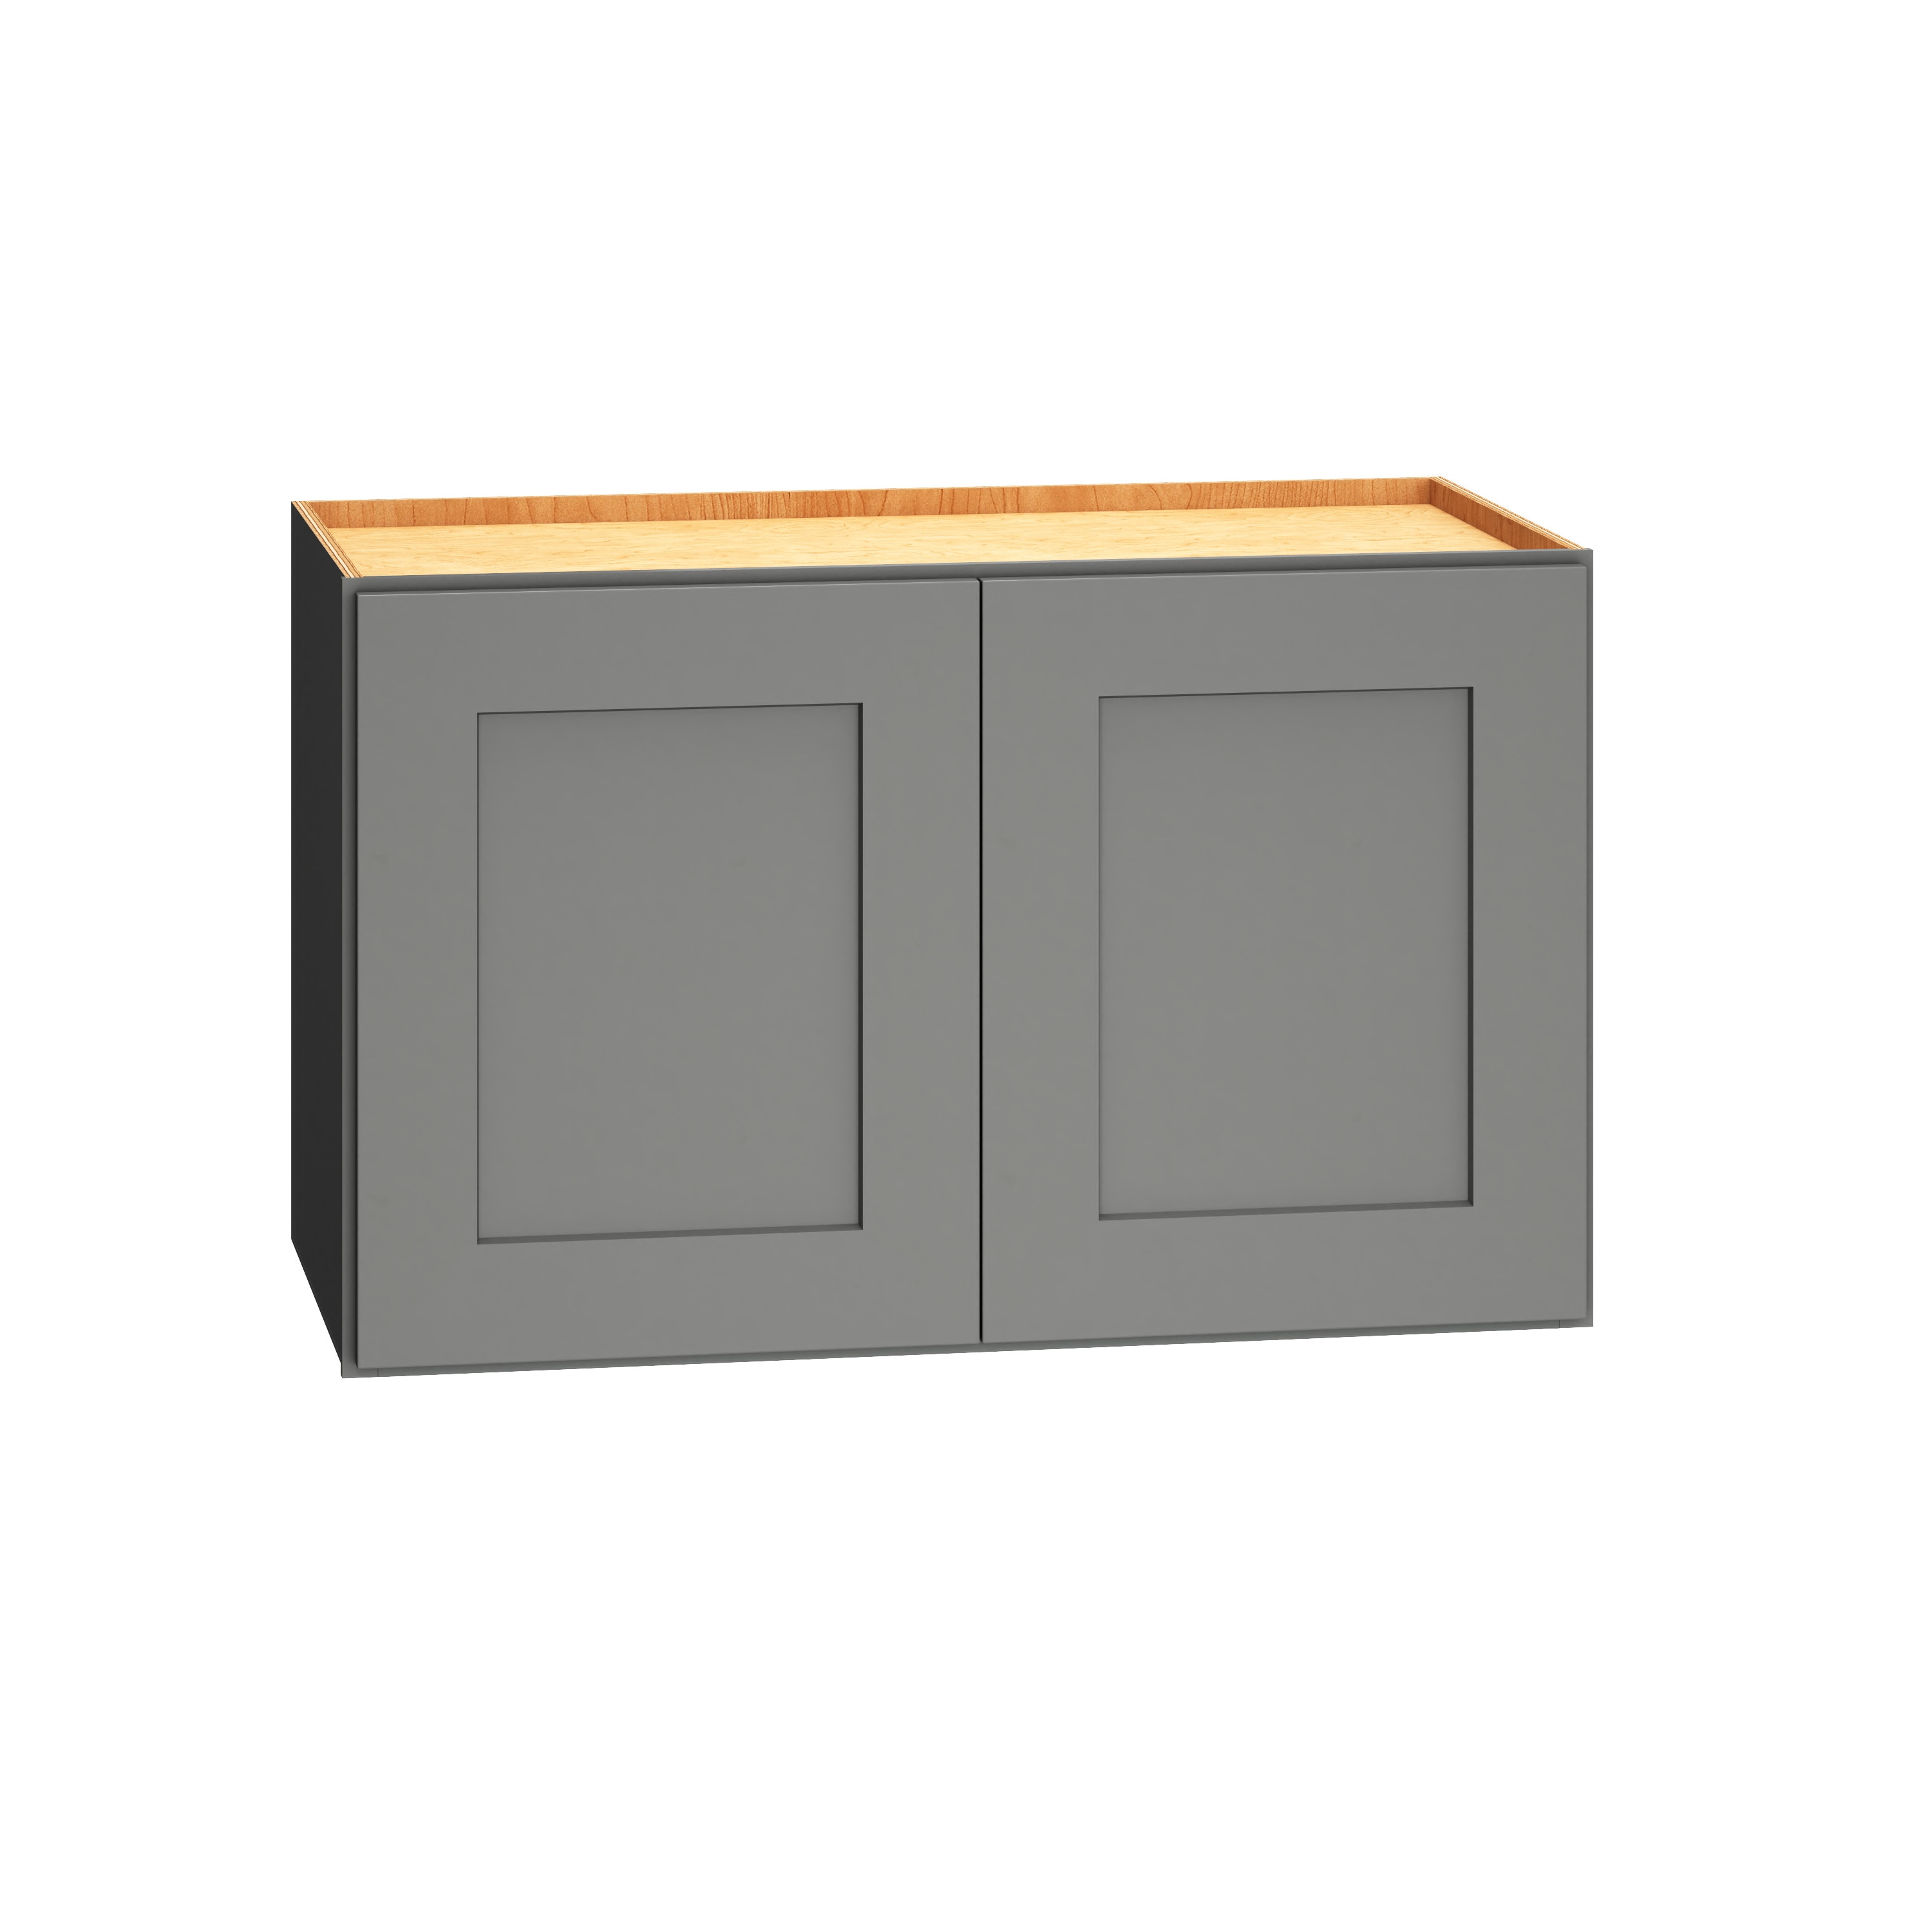 Diamond Express Jamestown 24-in W x 15-in H x 12-in D Moonstone Gray Painted Door Wall Fully Assembled Cabinet (Flat Panel Shaker Door Style) -  328 W2415